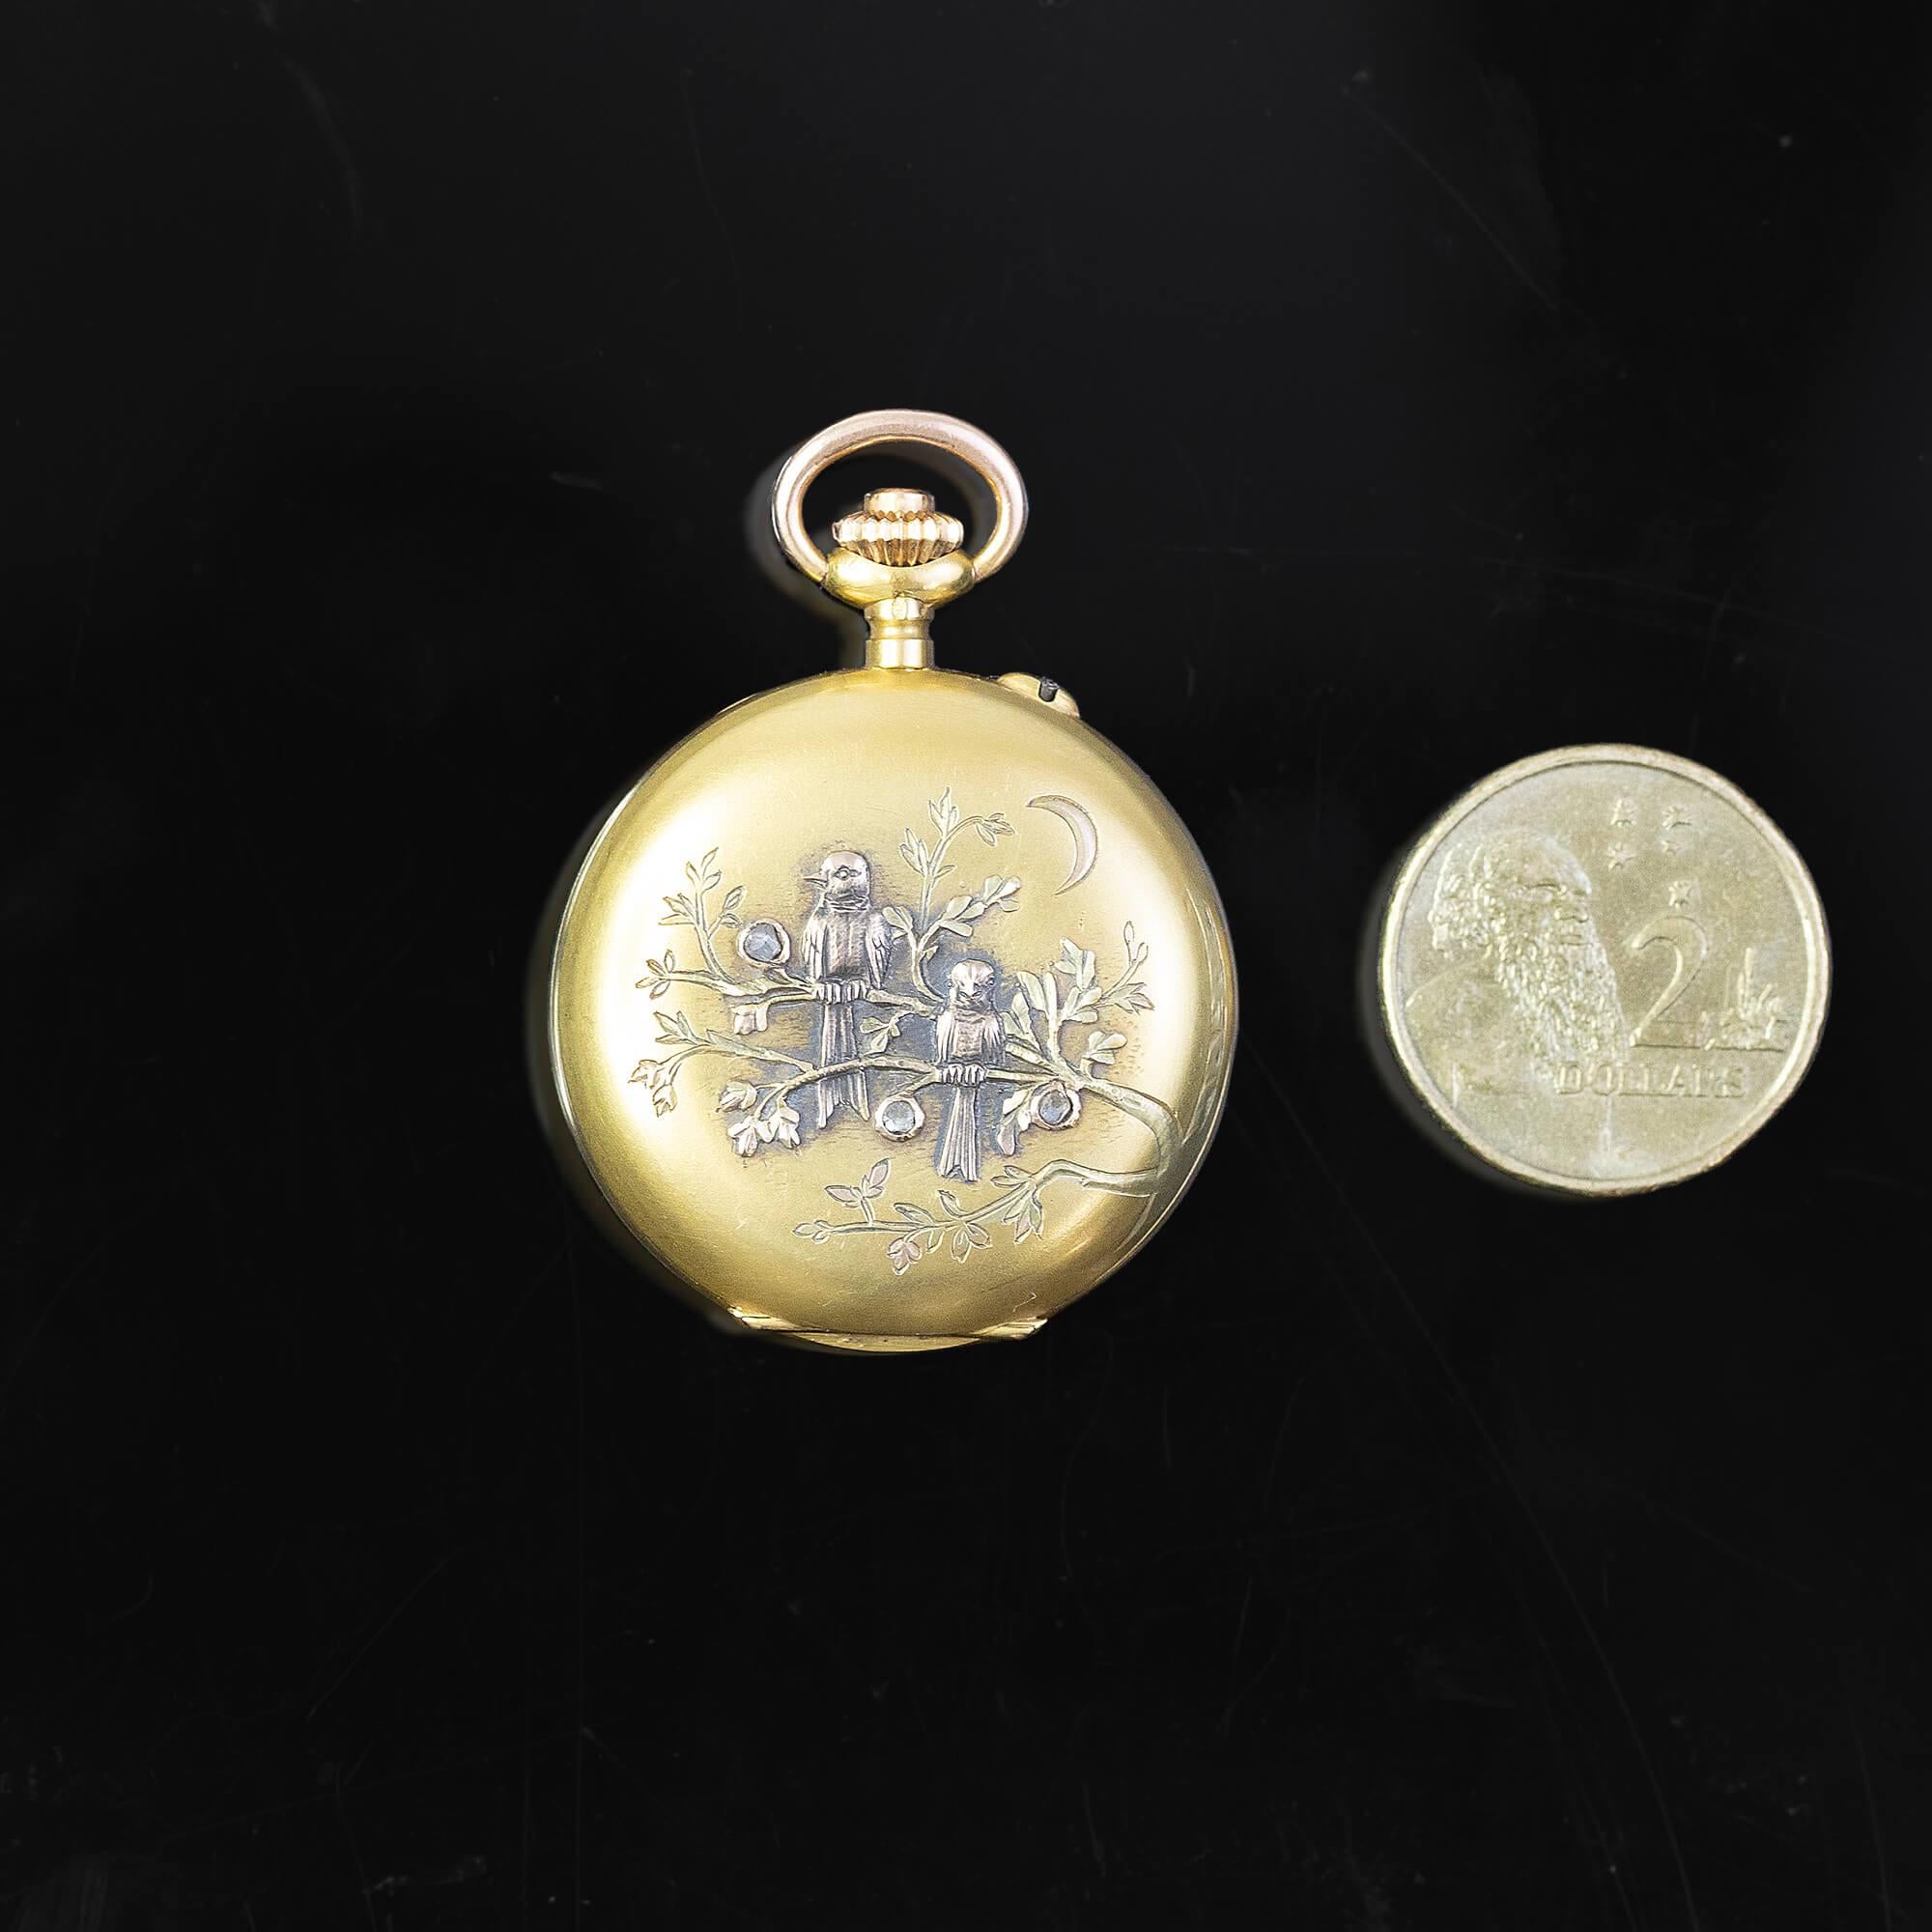 This 18k yellow gold Swiss-made Ladies’ pocket watch features a decorative raised and engraved scene of birds sitting on leafy branches in the night under a crescent moon. Three small rose cut diamonds set as blossoms to add a little sparkle.

18k